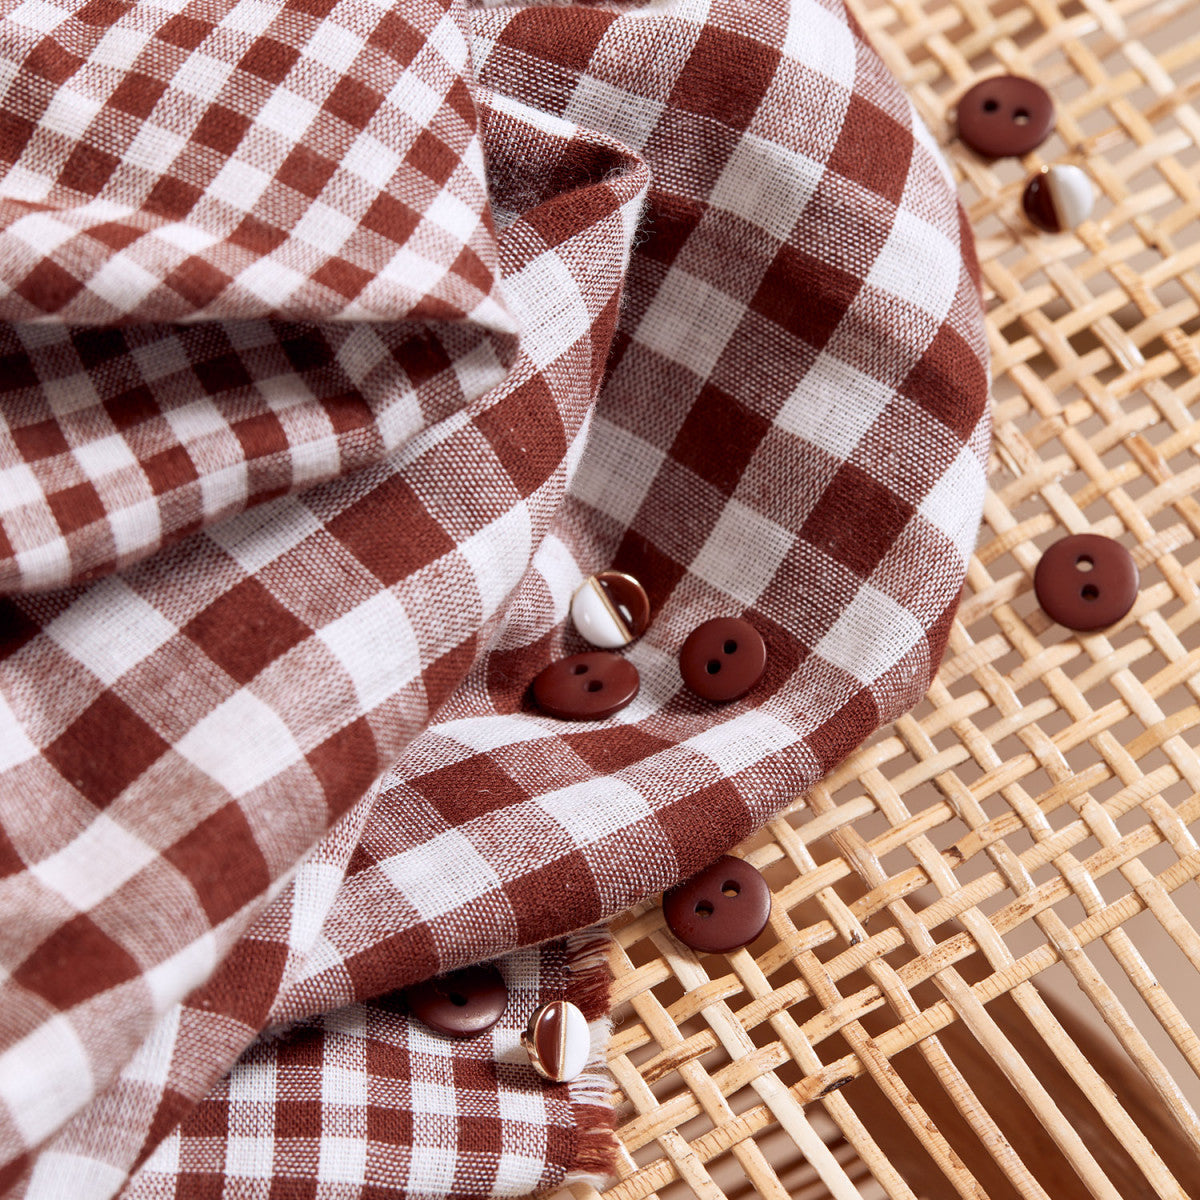 REMNANT 1.37 Metres - Atelier Brunette - Gingham Rust Off-White Cotton Double Gauze